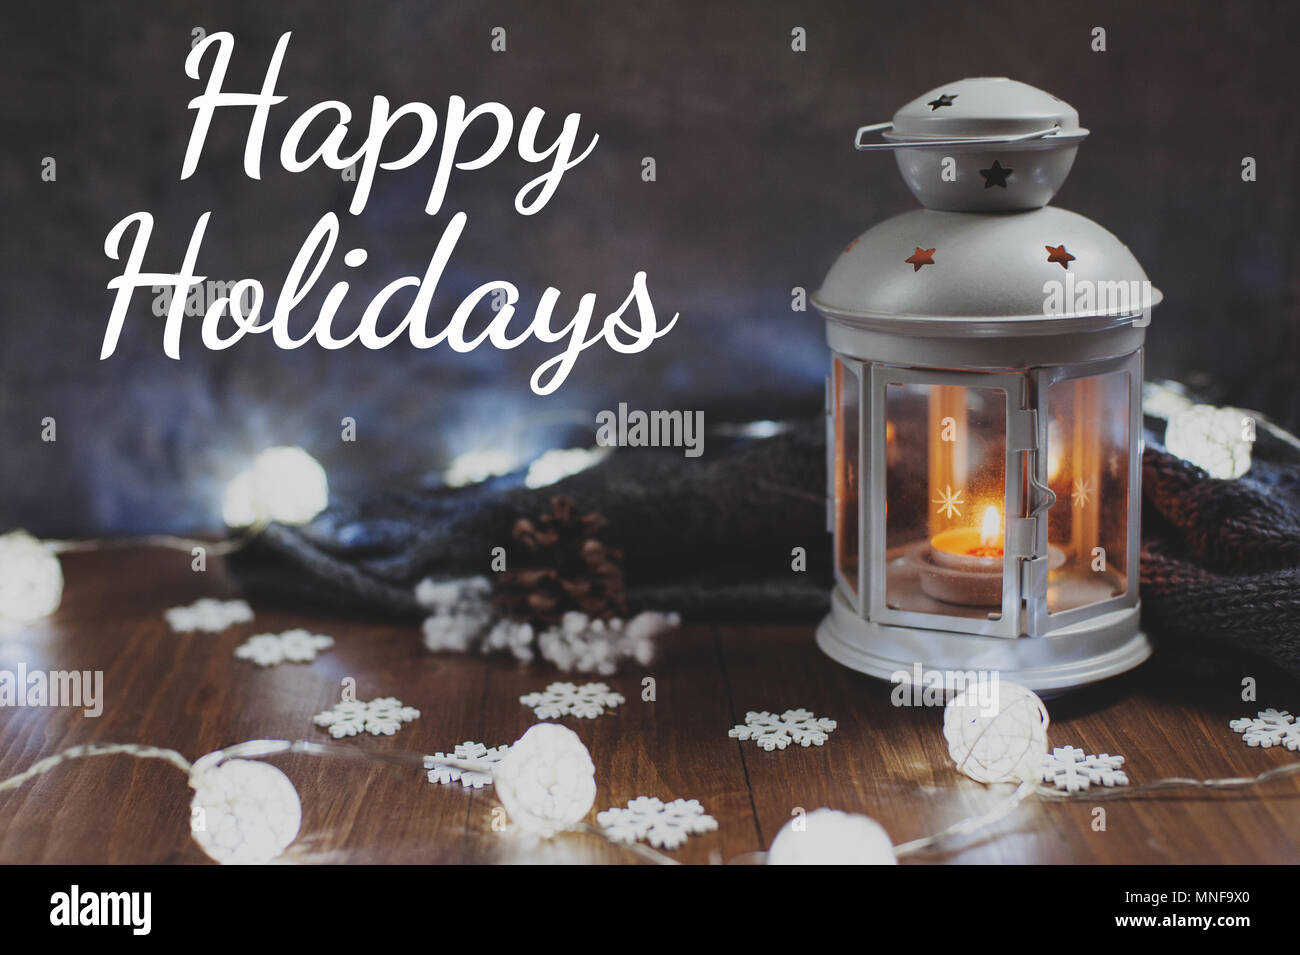 Cozy winter home. Lantern, candle, garland, snowflakes, pine cone, knitted gray sweater on a wooden table. The atmosphere of a New Year's fairy tale.  Stock Photo